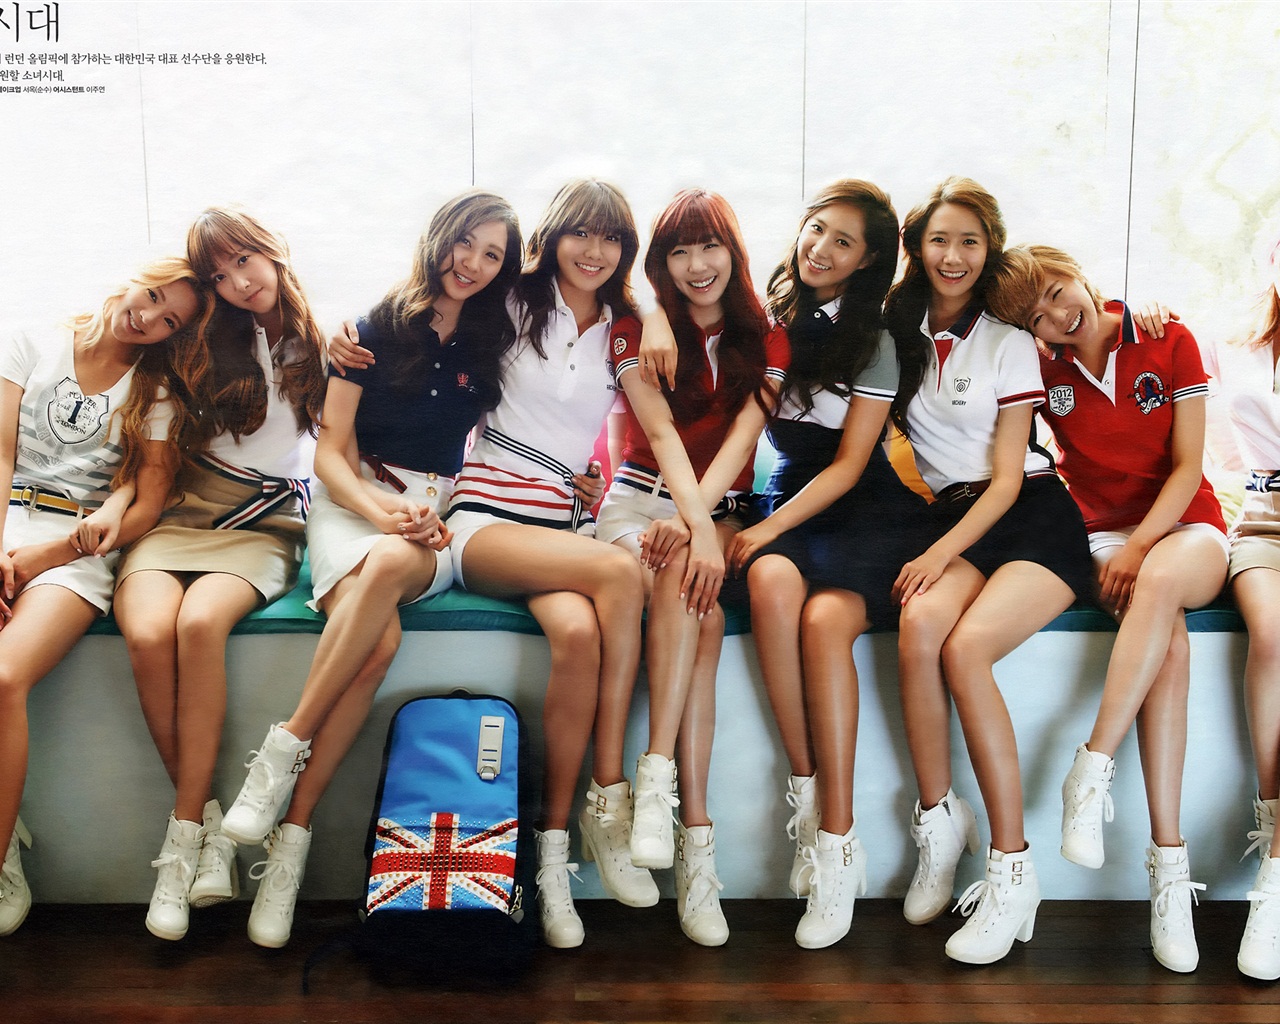 Girls Generation latest HD wallpapers collection #1 - 1280x1024